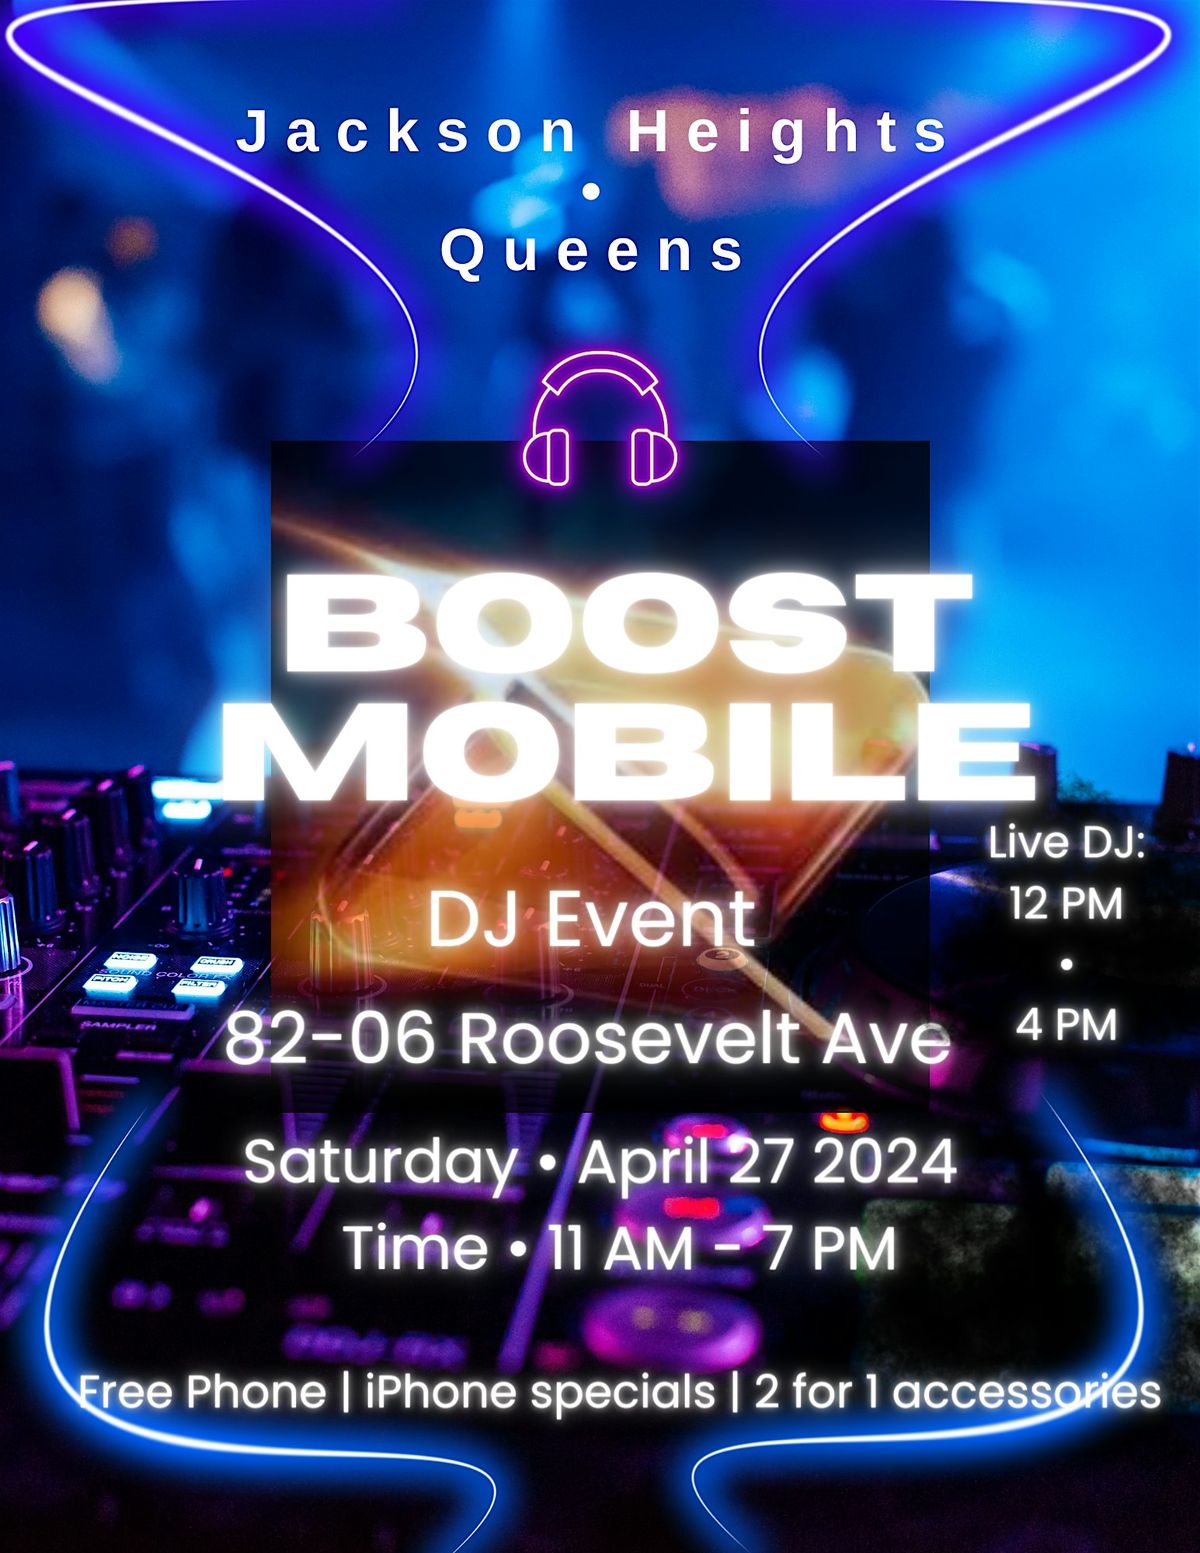 Boost Mobile DJ event at 82-06 Roosevelt Ave  Jackson Heights, NY 4\/27\/2024